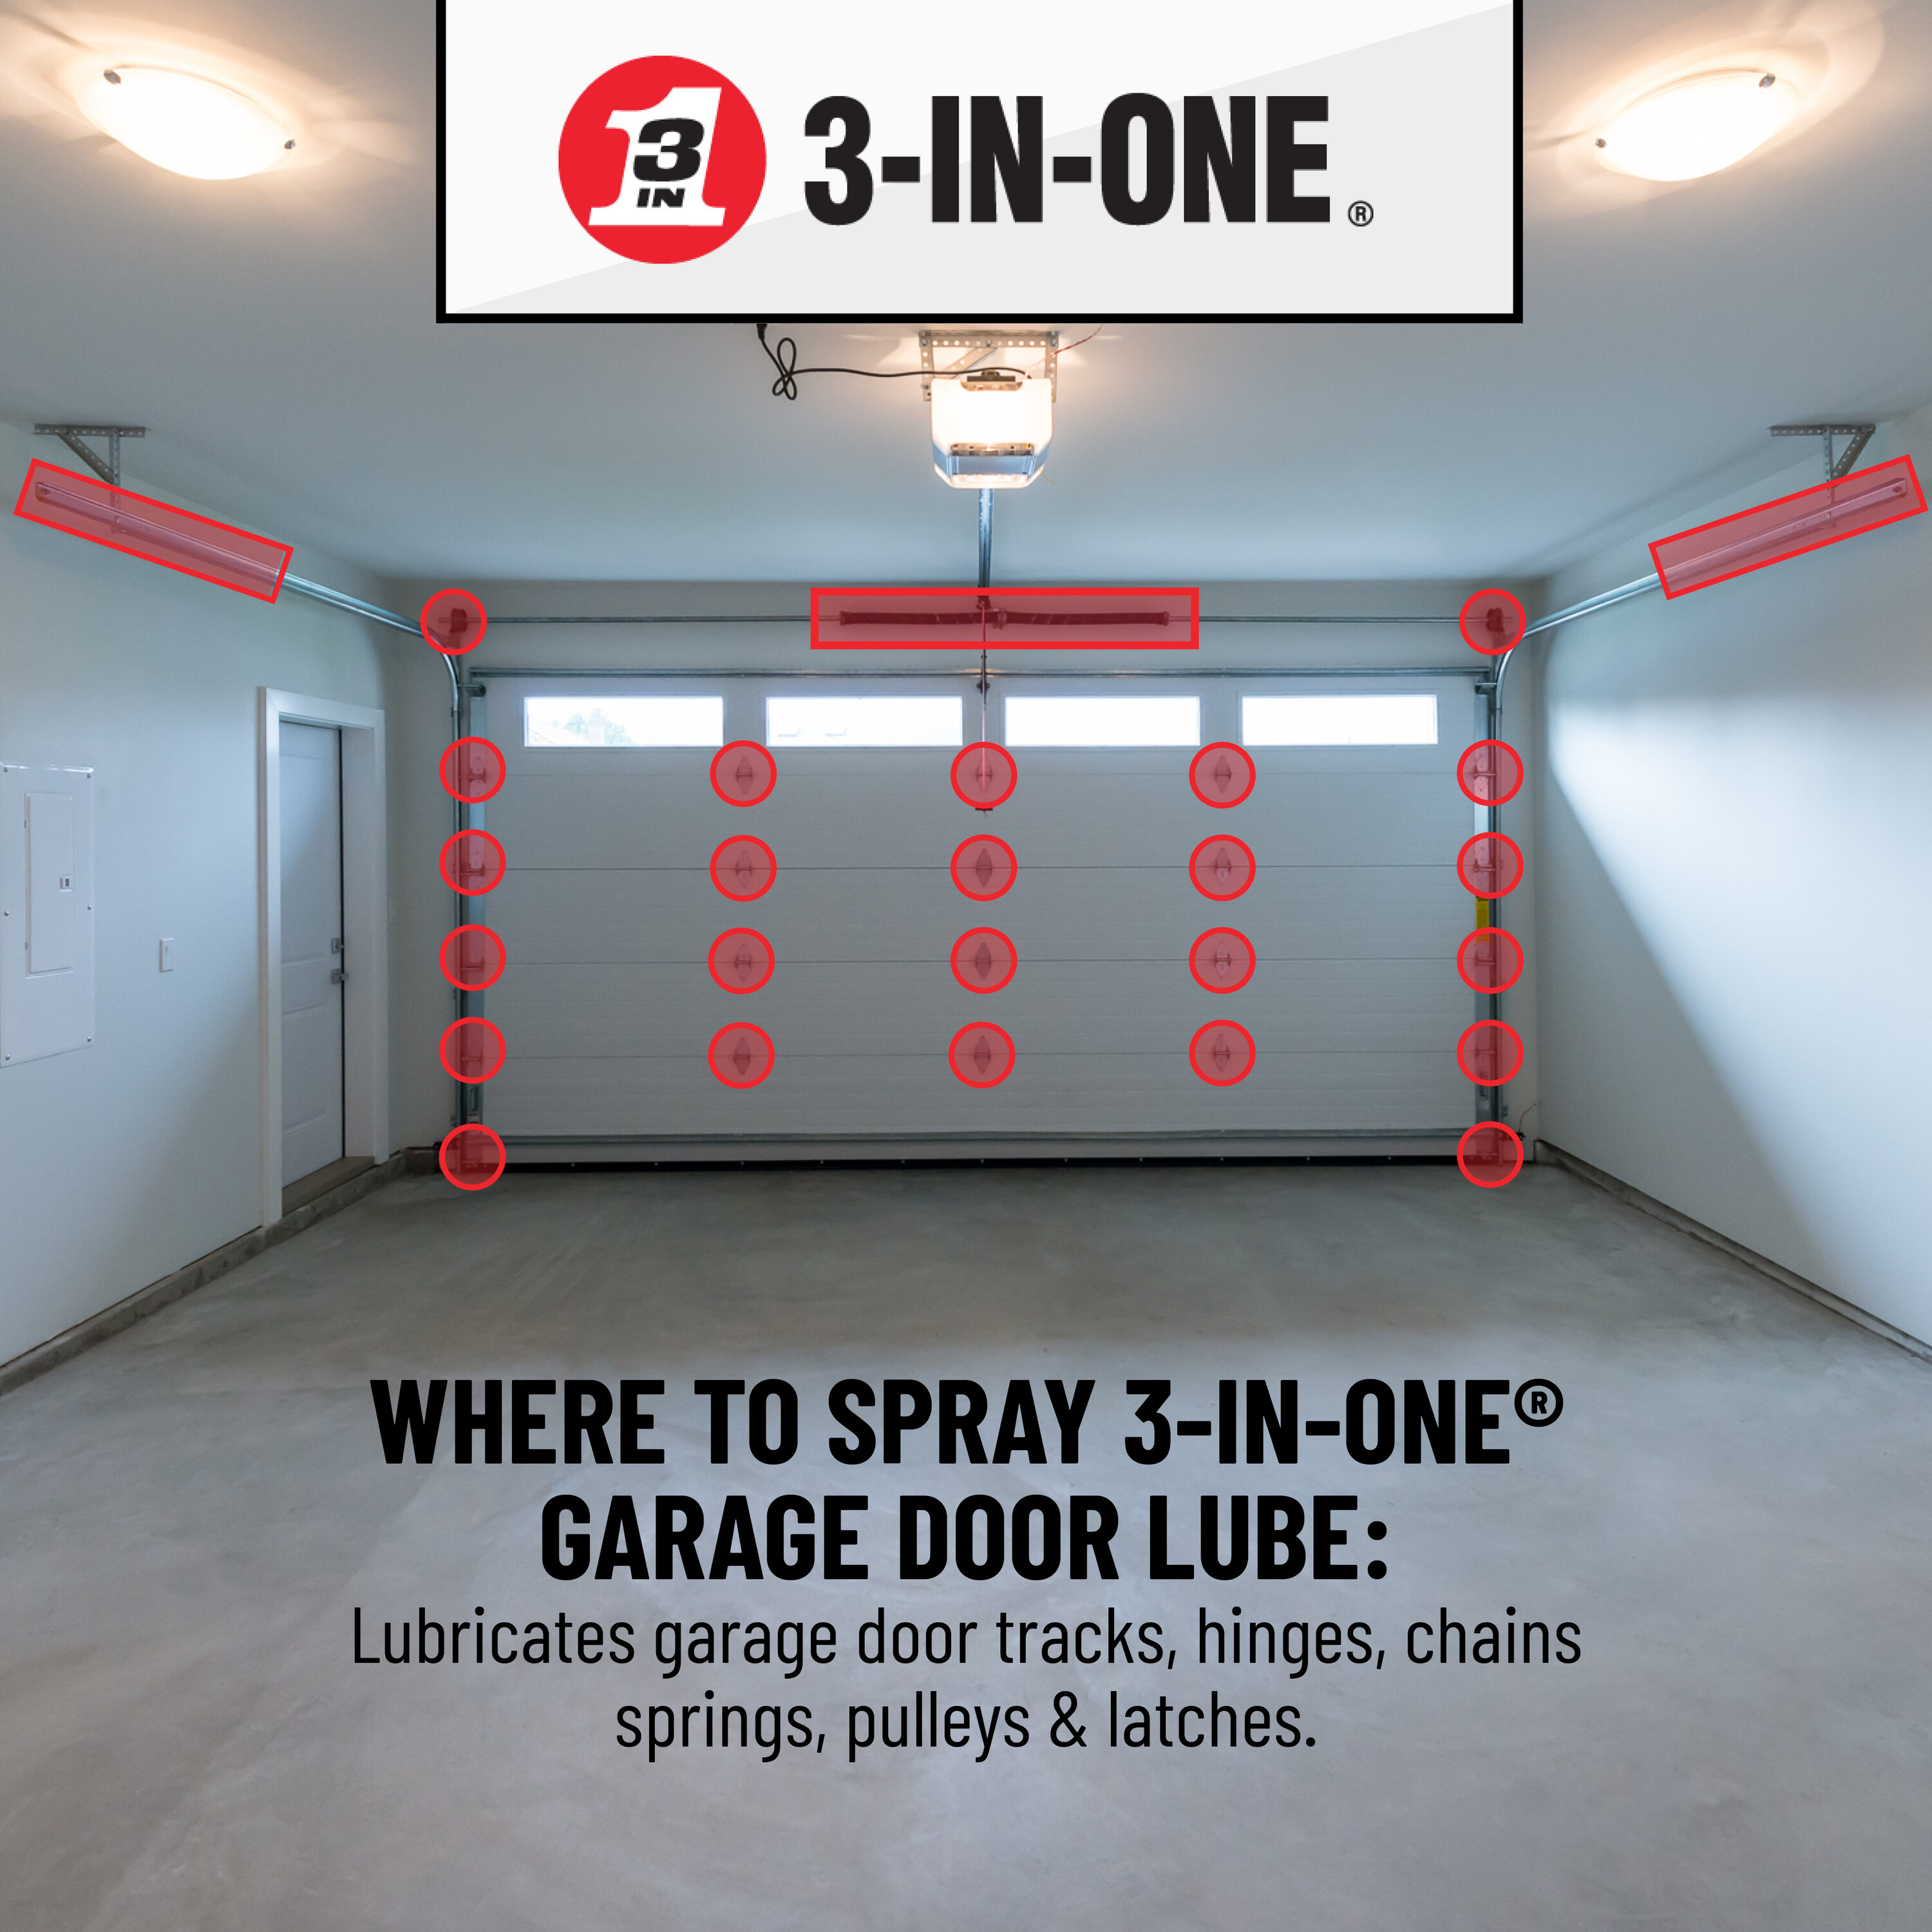 A review of 3-in-one garage door lubricant 